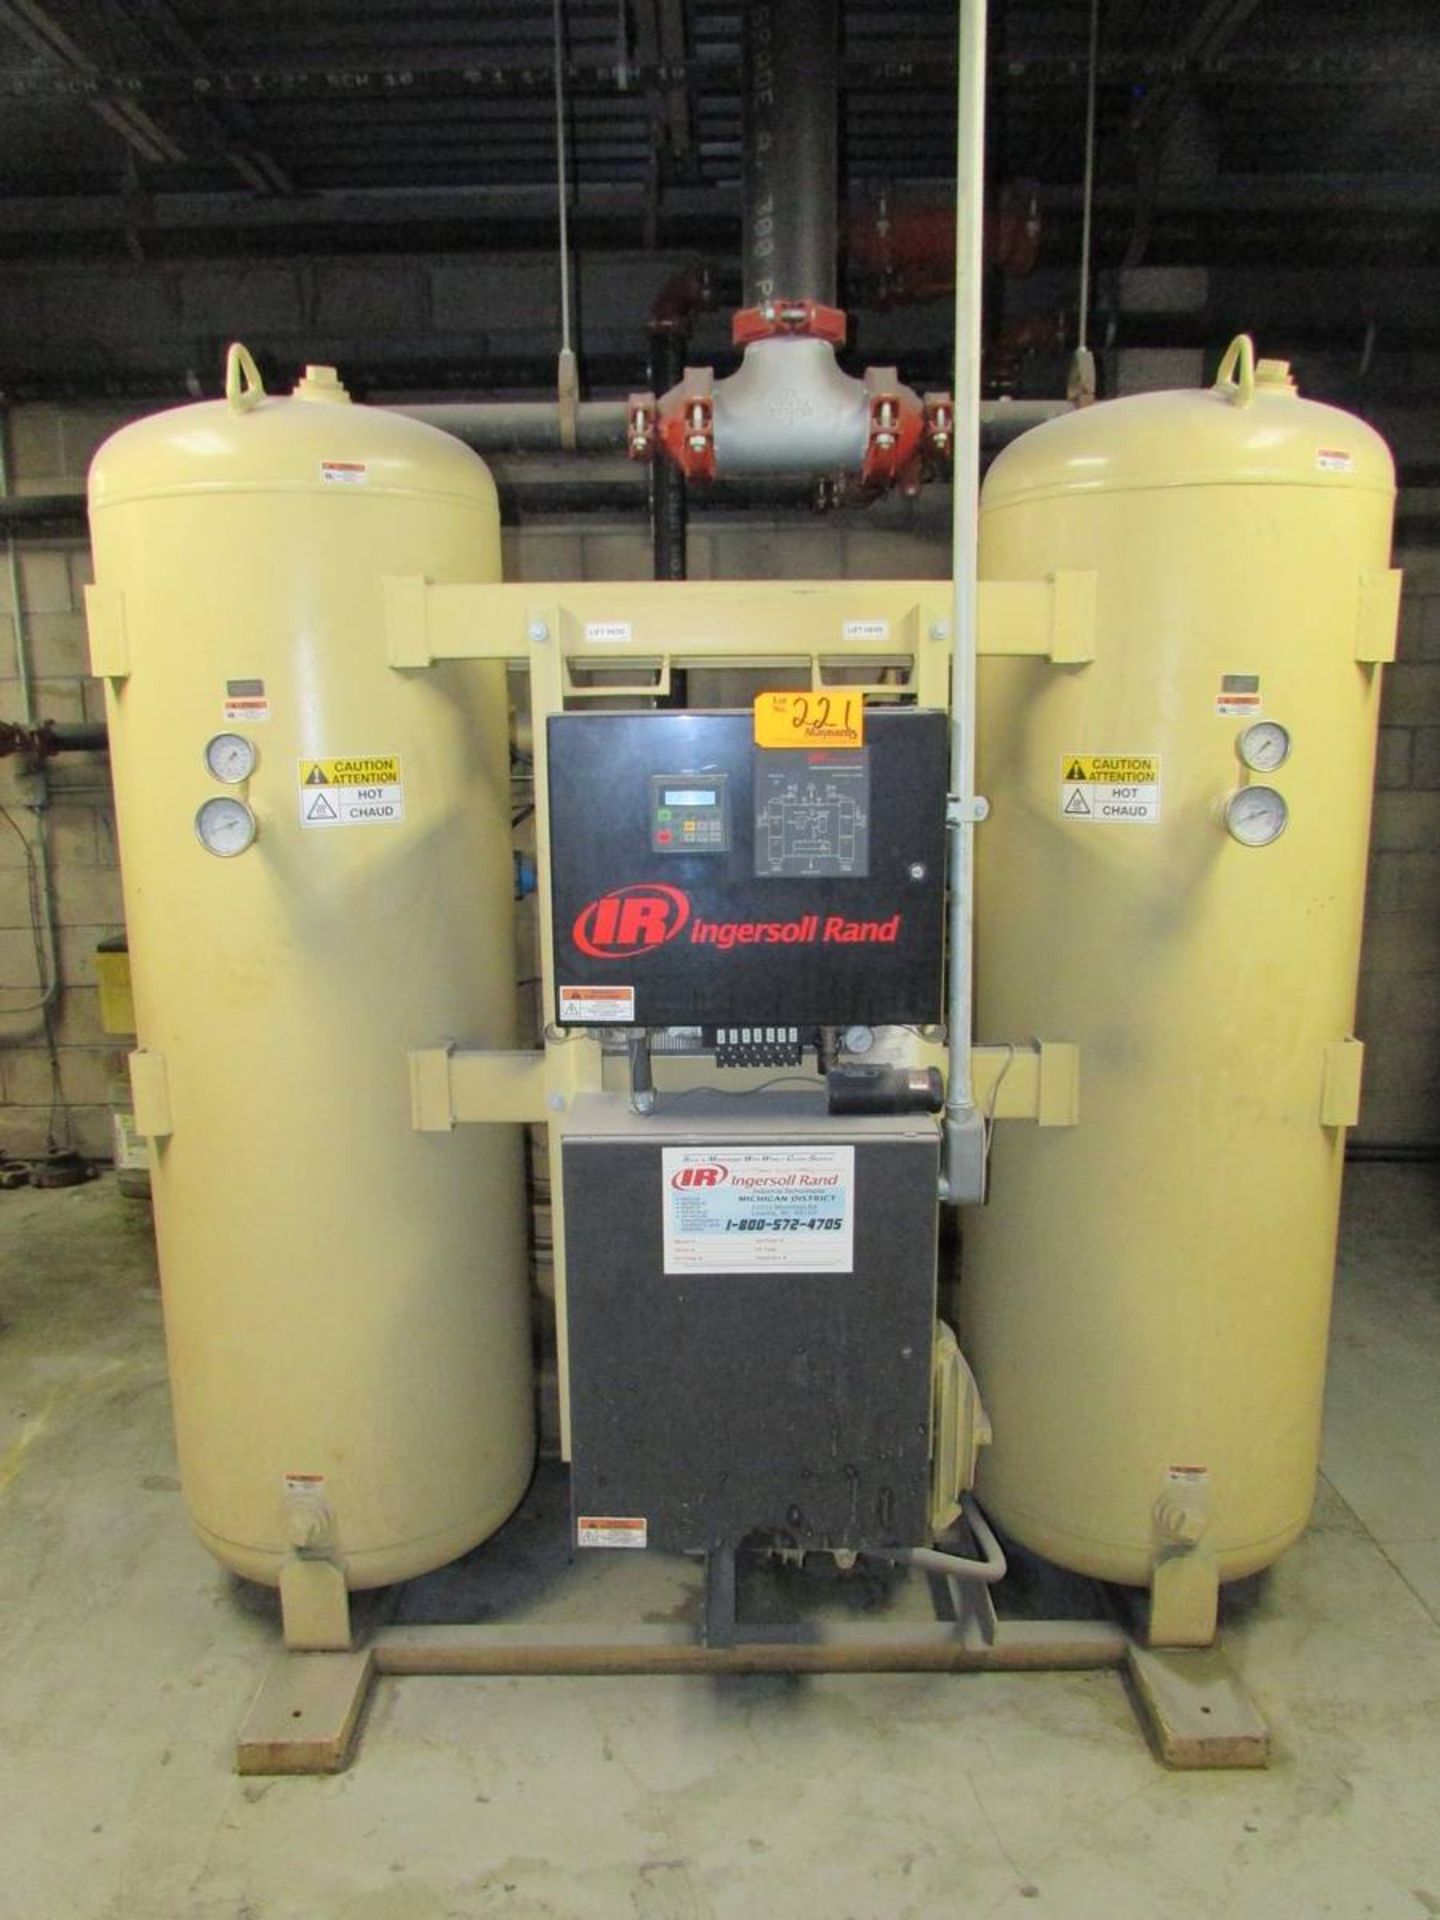 Ingersoll Rand HB10004HN00H Heated Blower Desiccant Air Dryer - Image 2 of 7